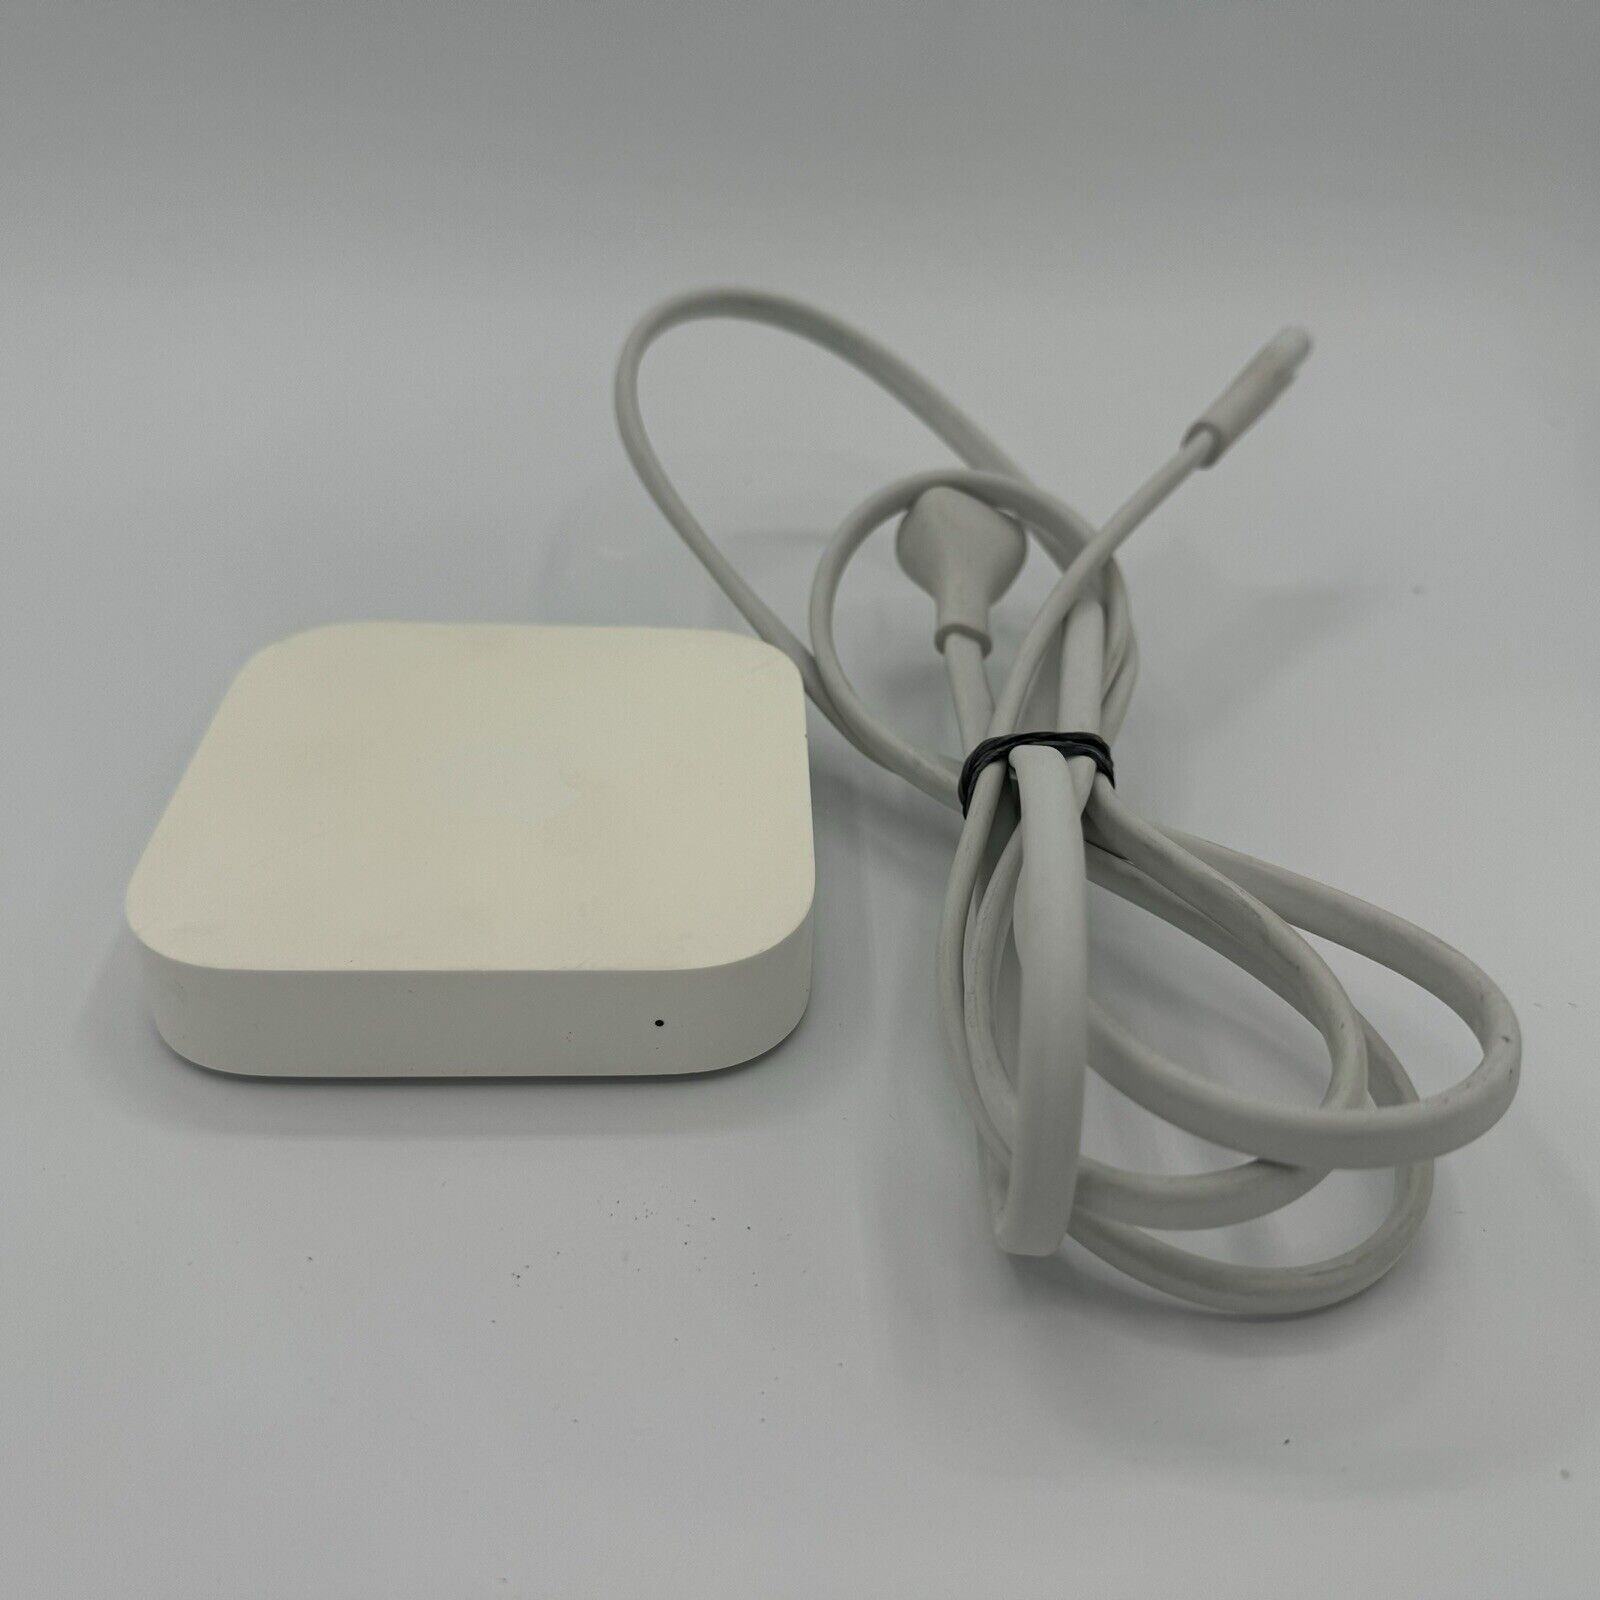 Apple AirPort Express Base Station (2nd Generation) A1392